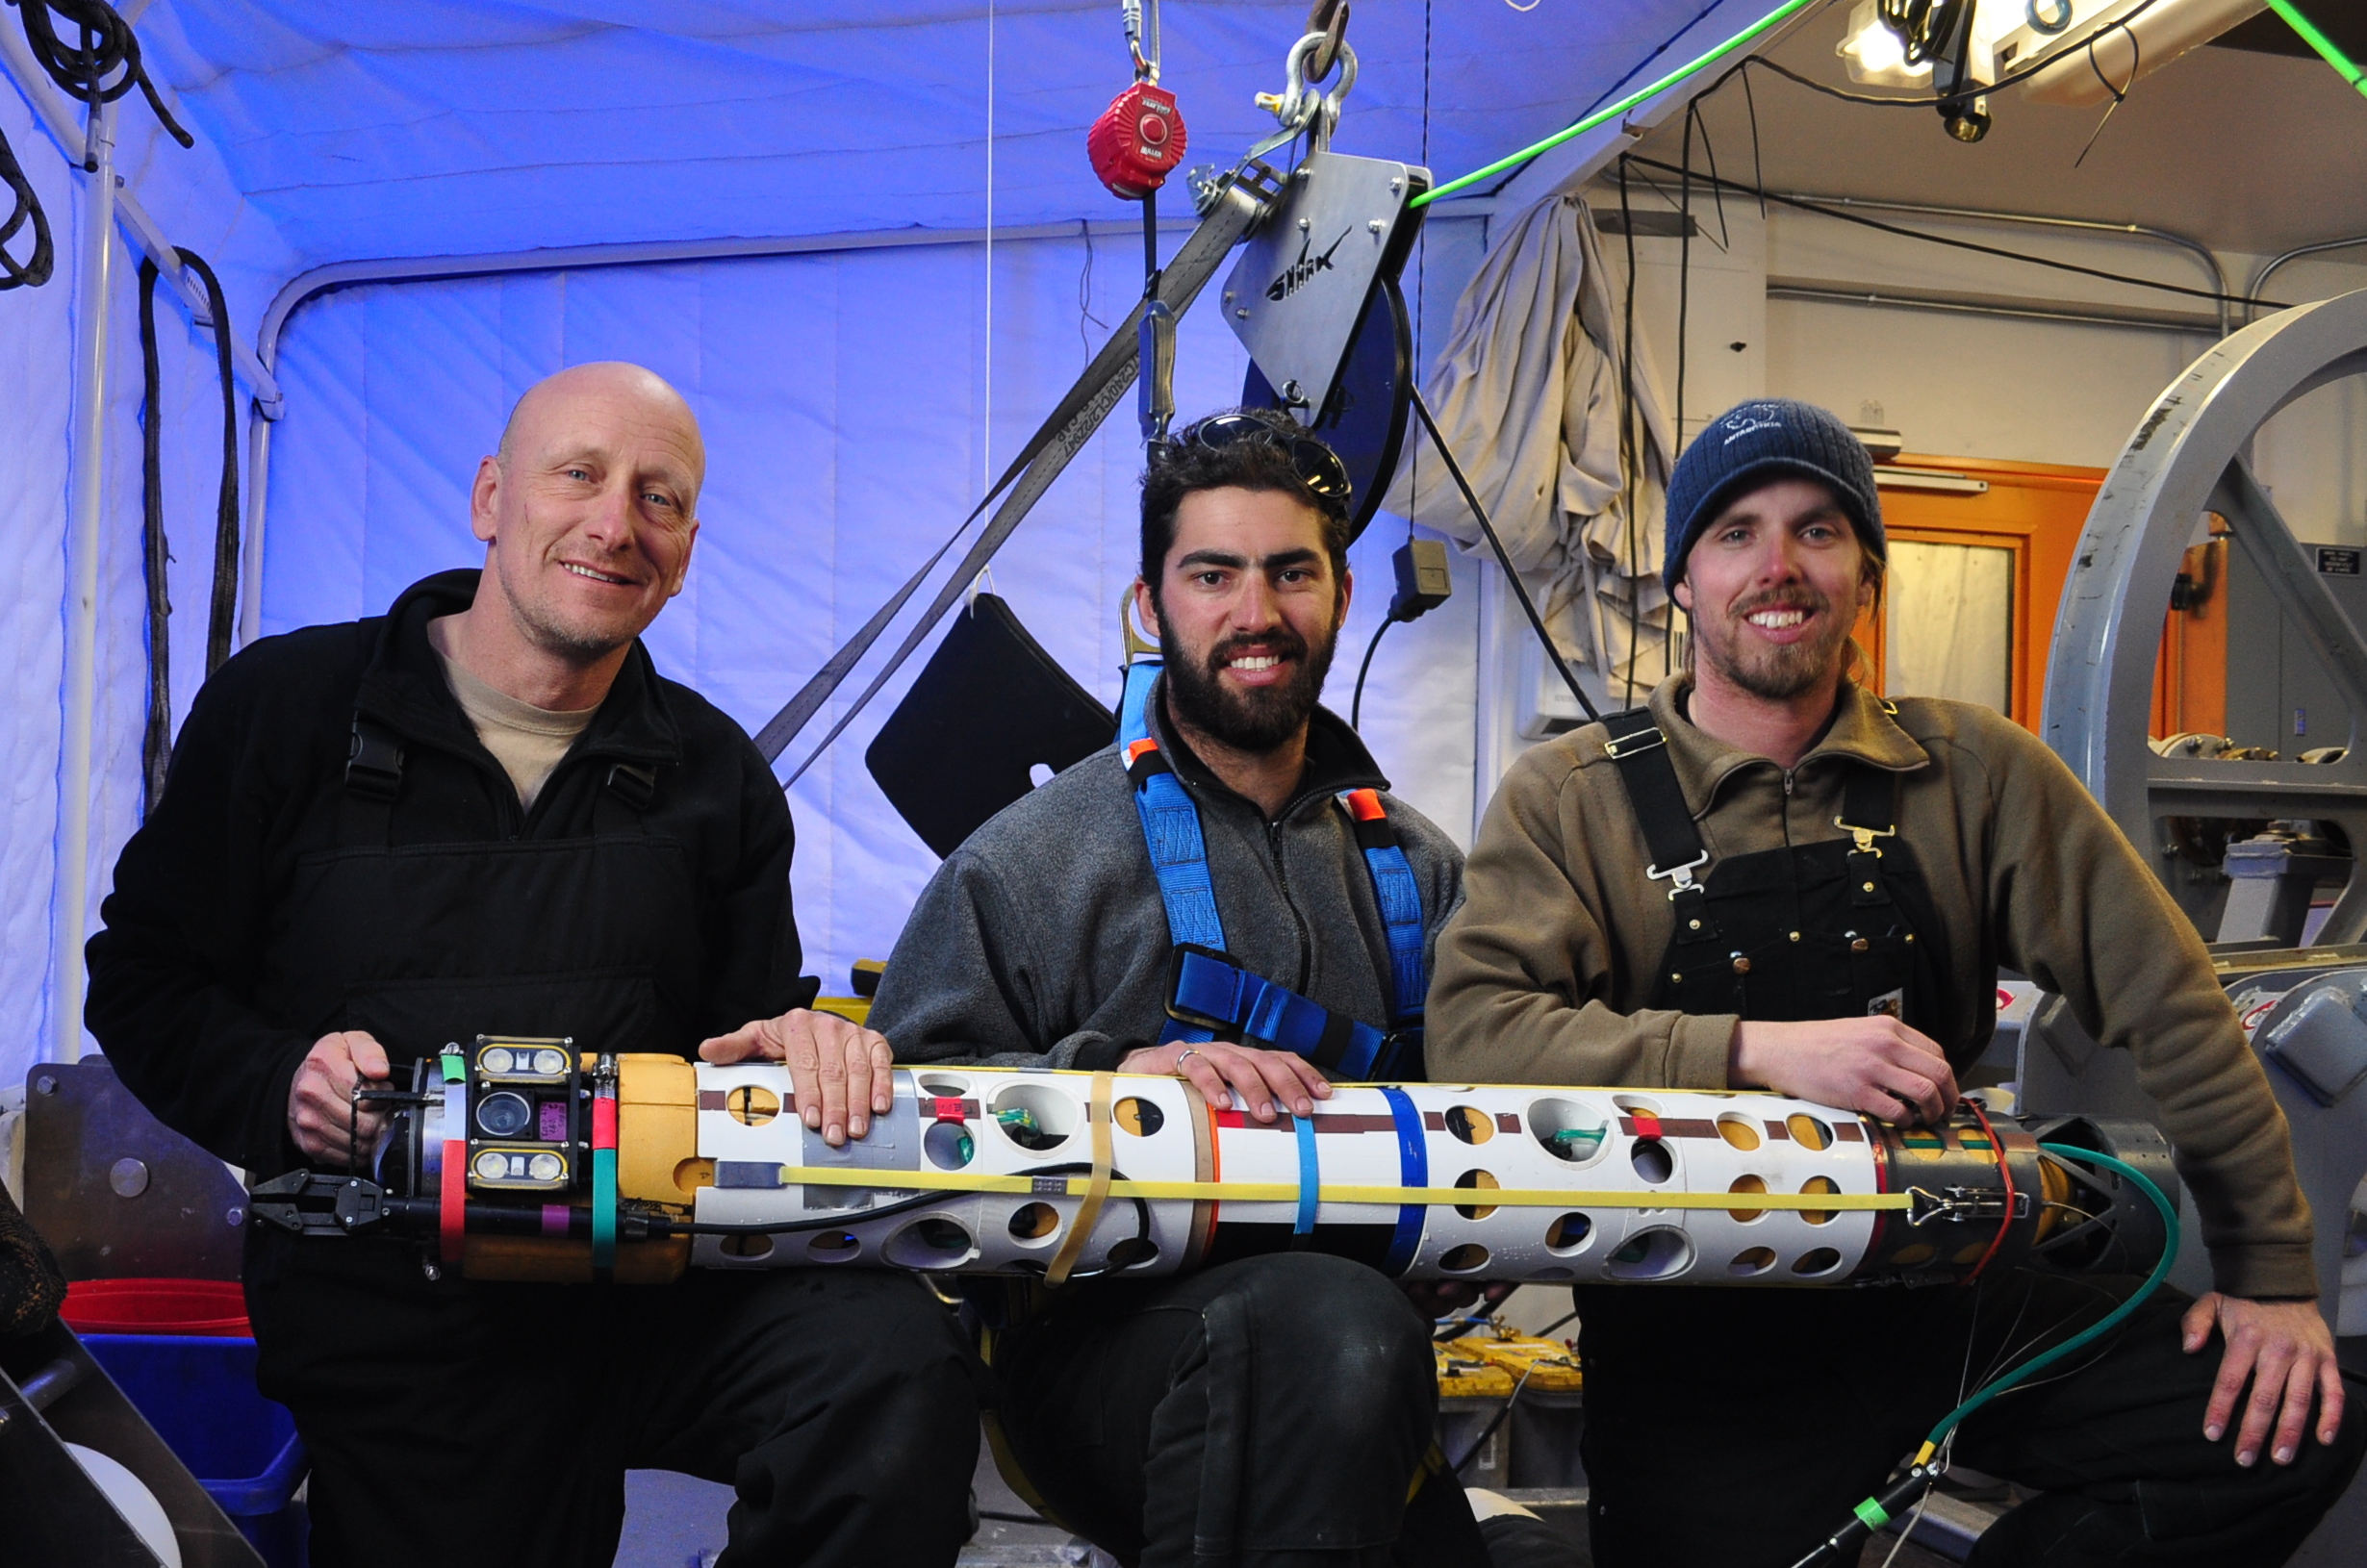 Robot deployment team engineers Bob Zook, Paul Mahecek, and Dustin Carroll, seen here holding the underwater robot that captured images of the ice anemones. Image credit: Dr. Frank R. Rack, ANDRILL Science Management Office, University of Nebraska-Lincoln.